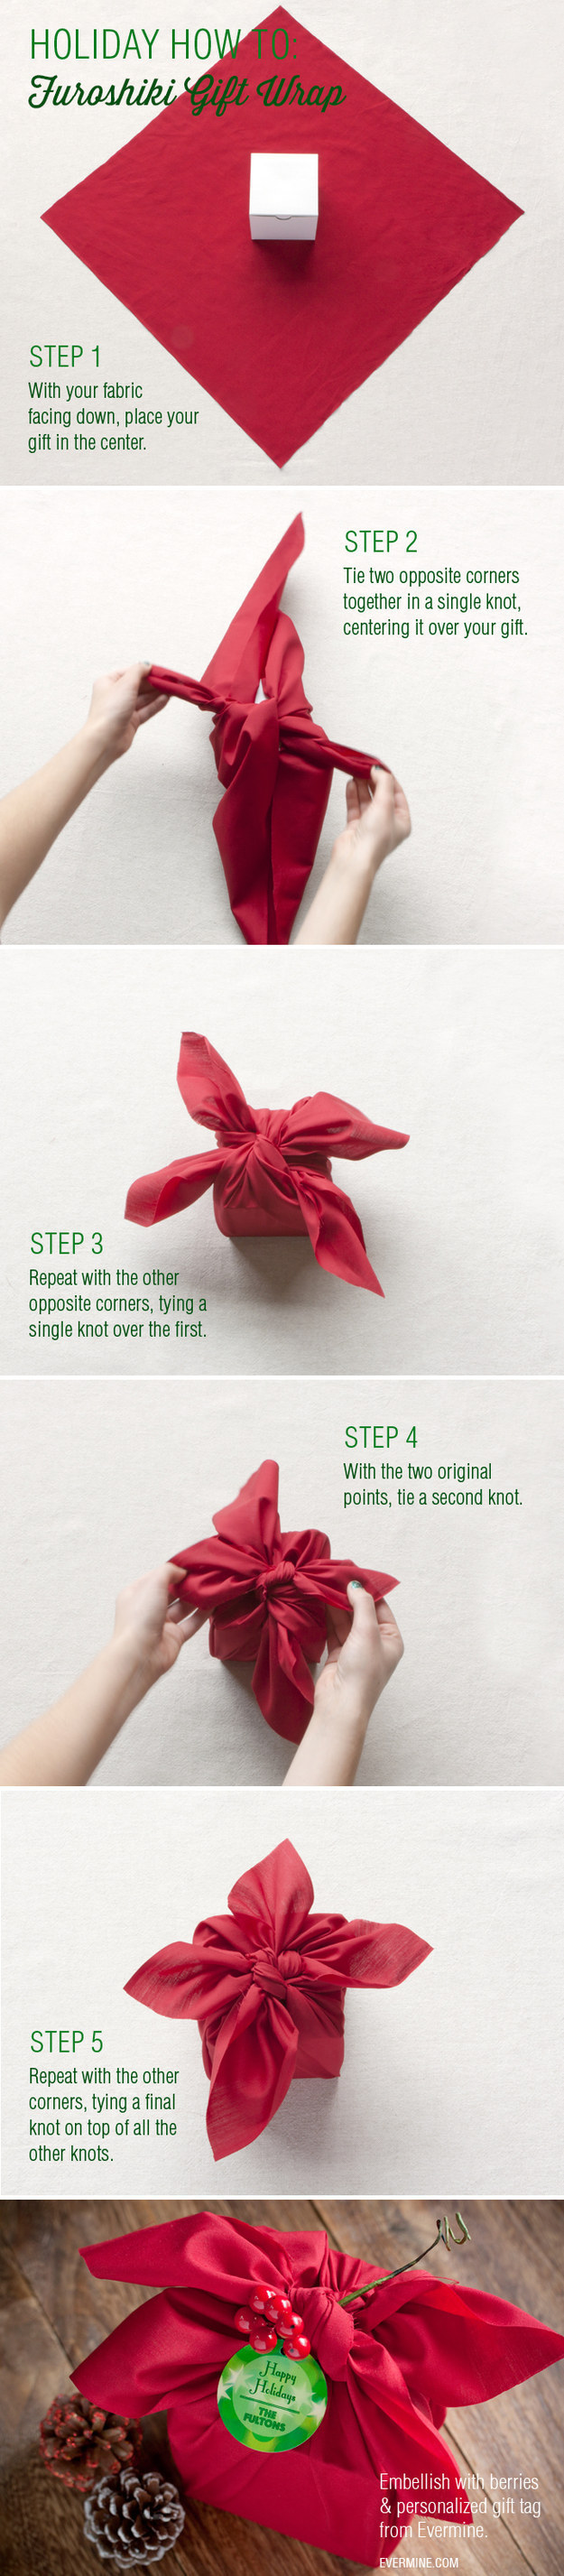 Gift Wrapping Ideas 2